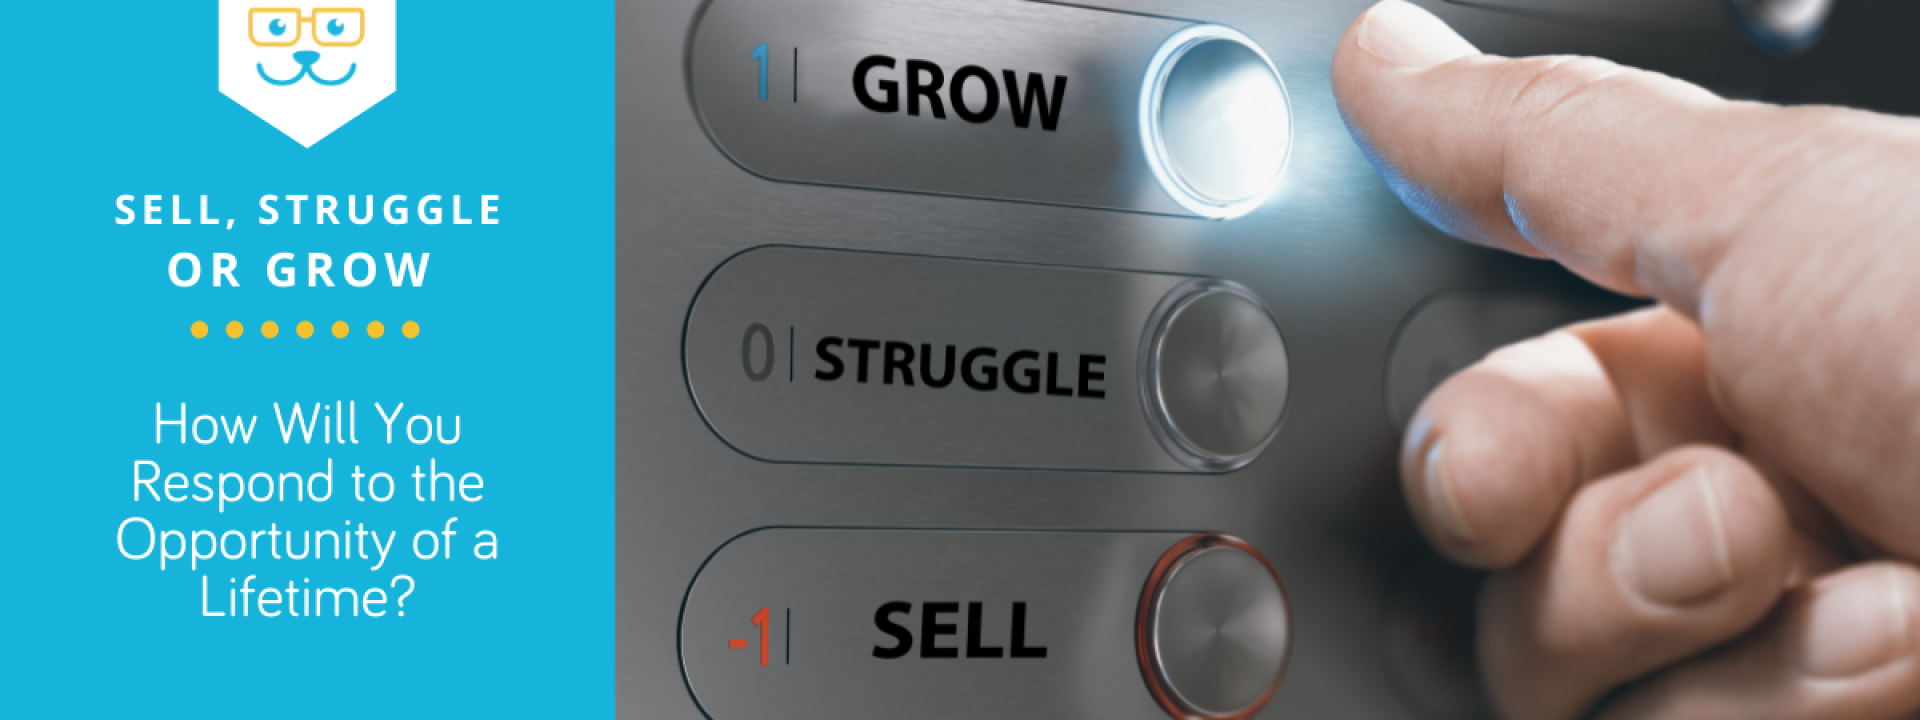 Sell, Struggle, or Grow - How Will You Respond to the Opportunity of a Lifetime?